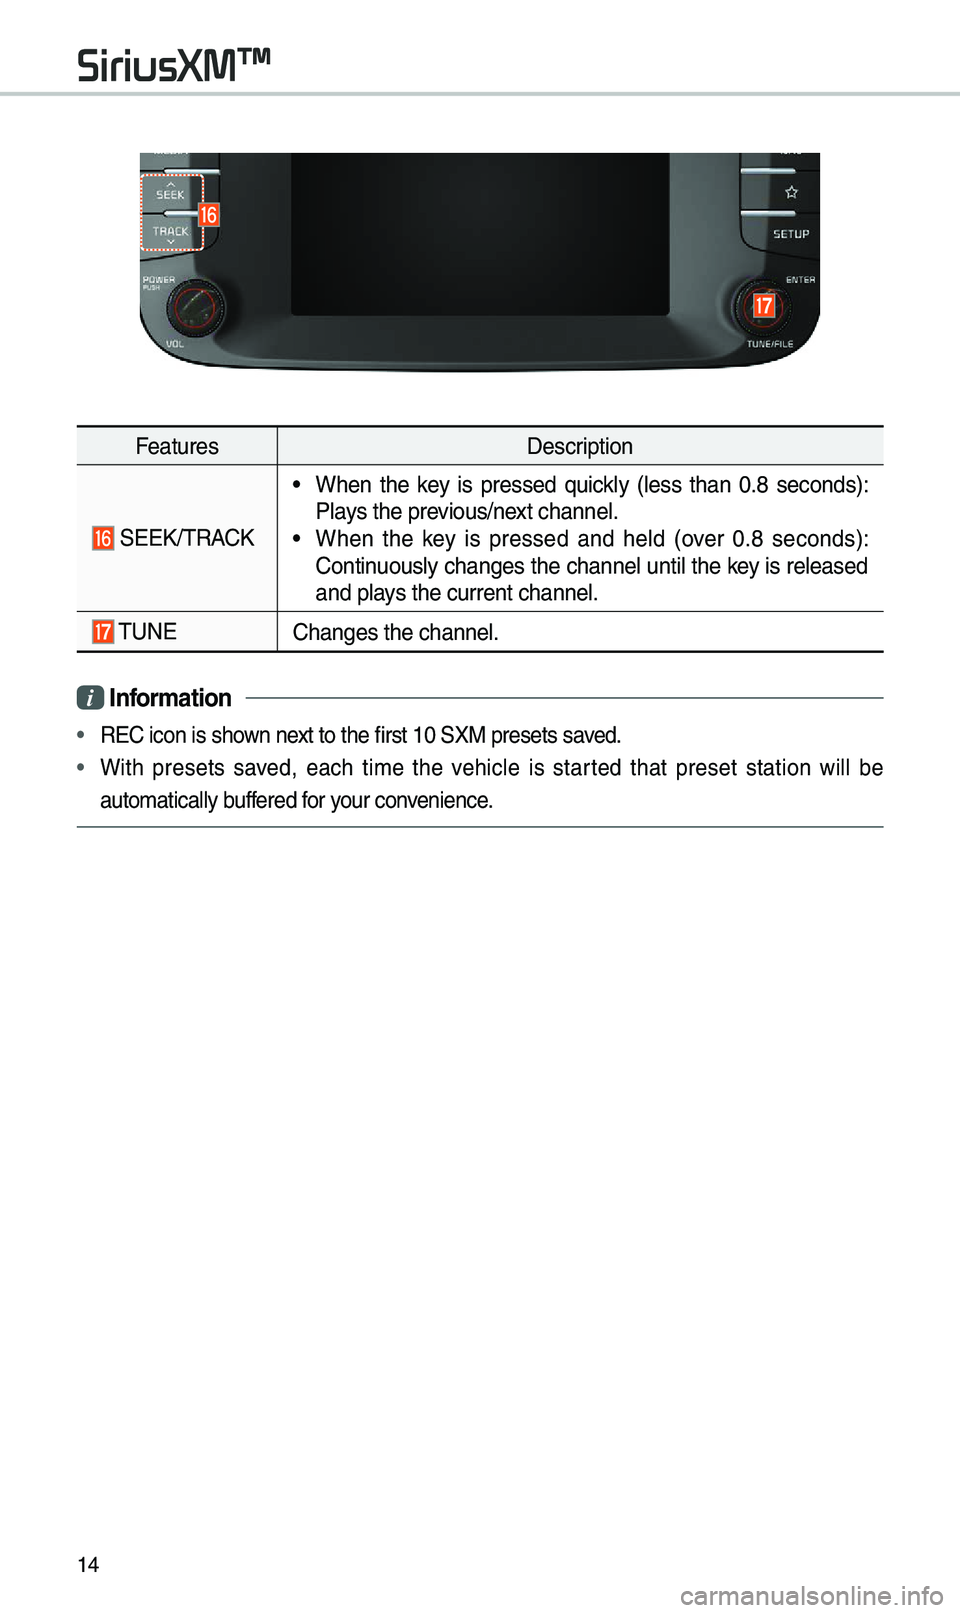 KIA SOUL EV 2019  Navigation System Quick Reference Guide 14
FeaturesDescription
 SEEK/\fRACK
• When  the  key  is  pressed  quickly  (less  than  0.8  seconds): 
Plays the previous/next channel.
• When  the  key  is  pressed  and  held  (over  0.8  seco